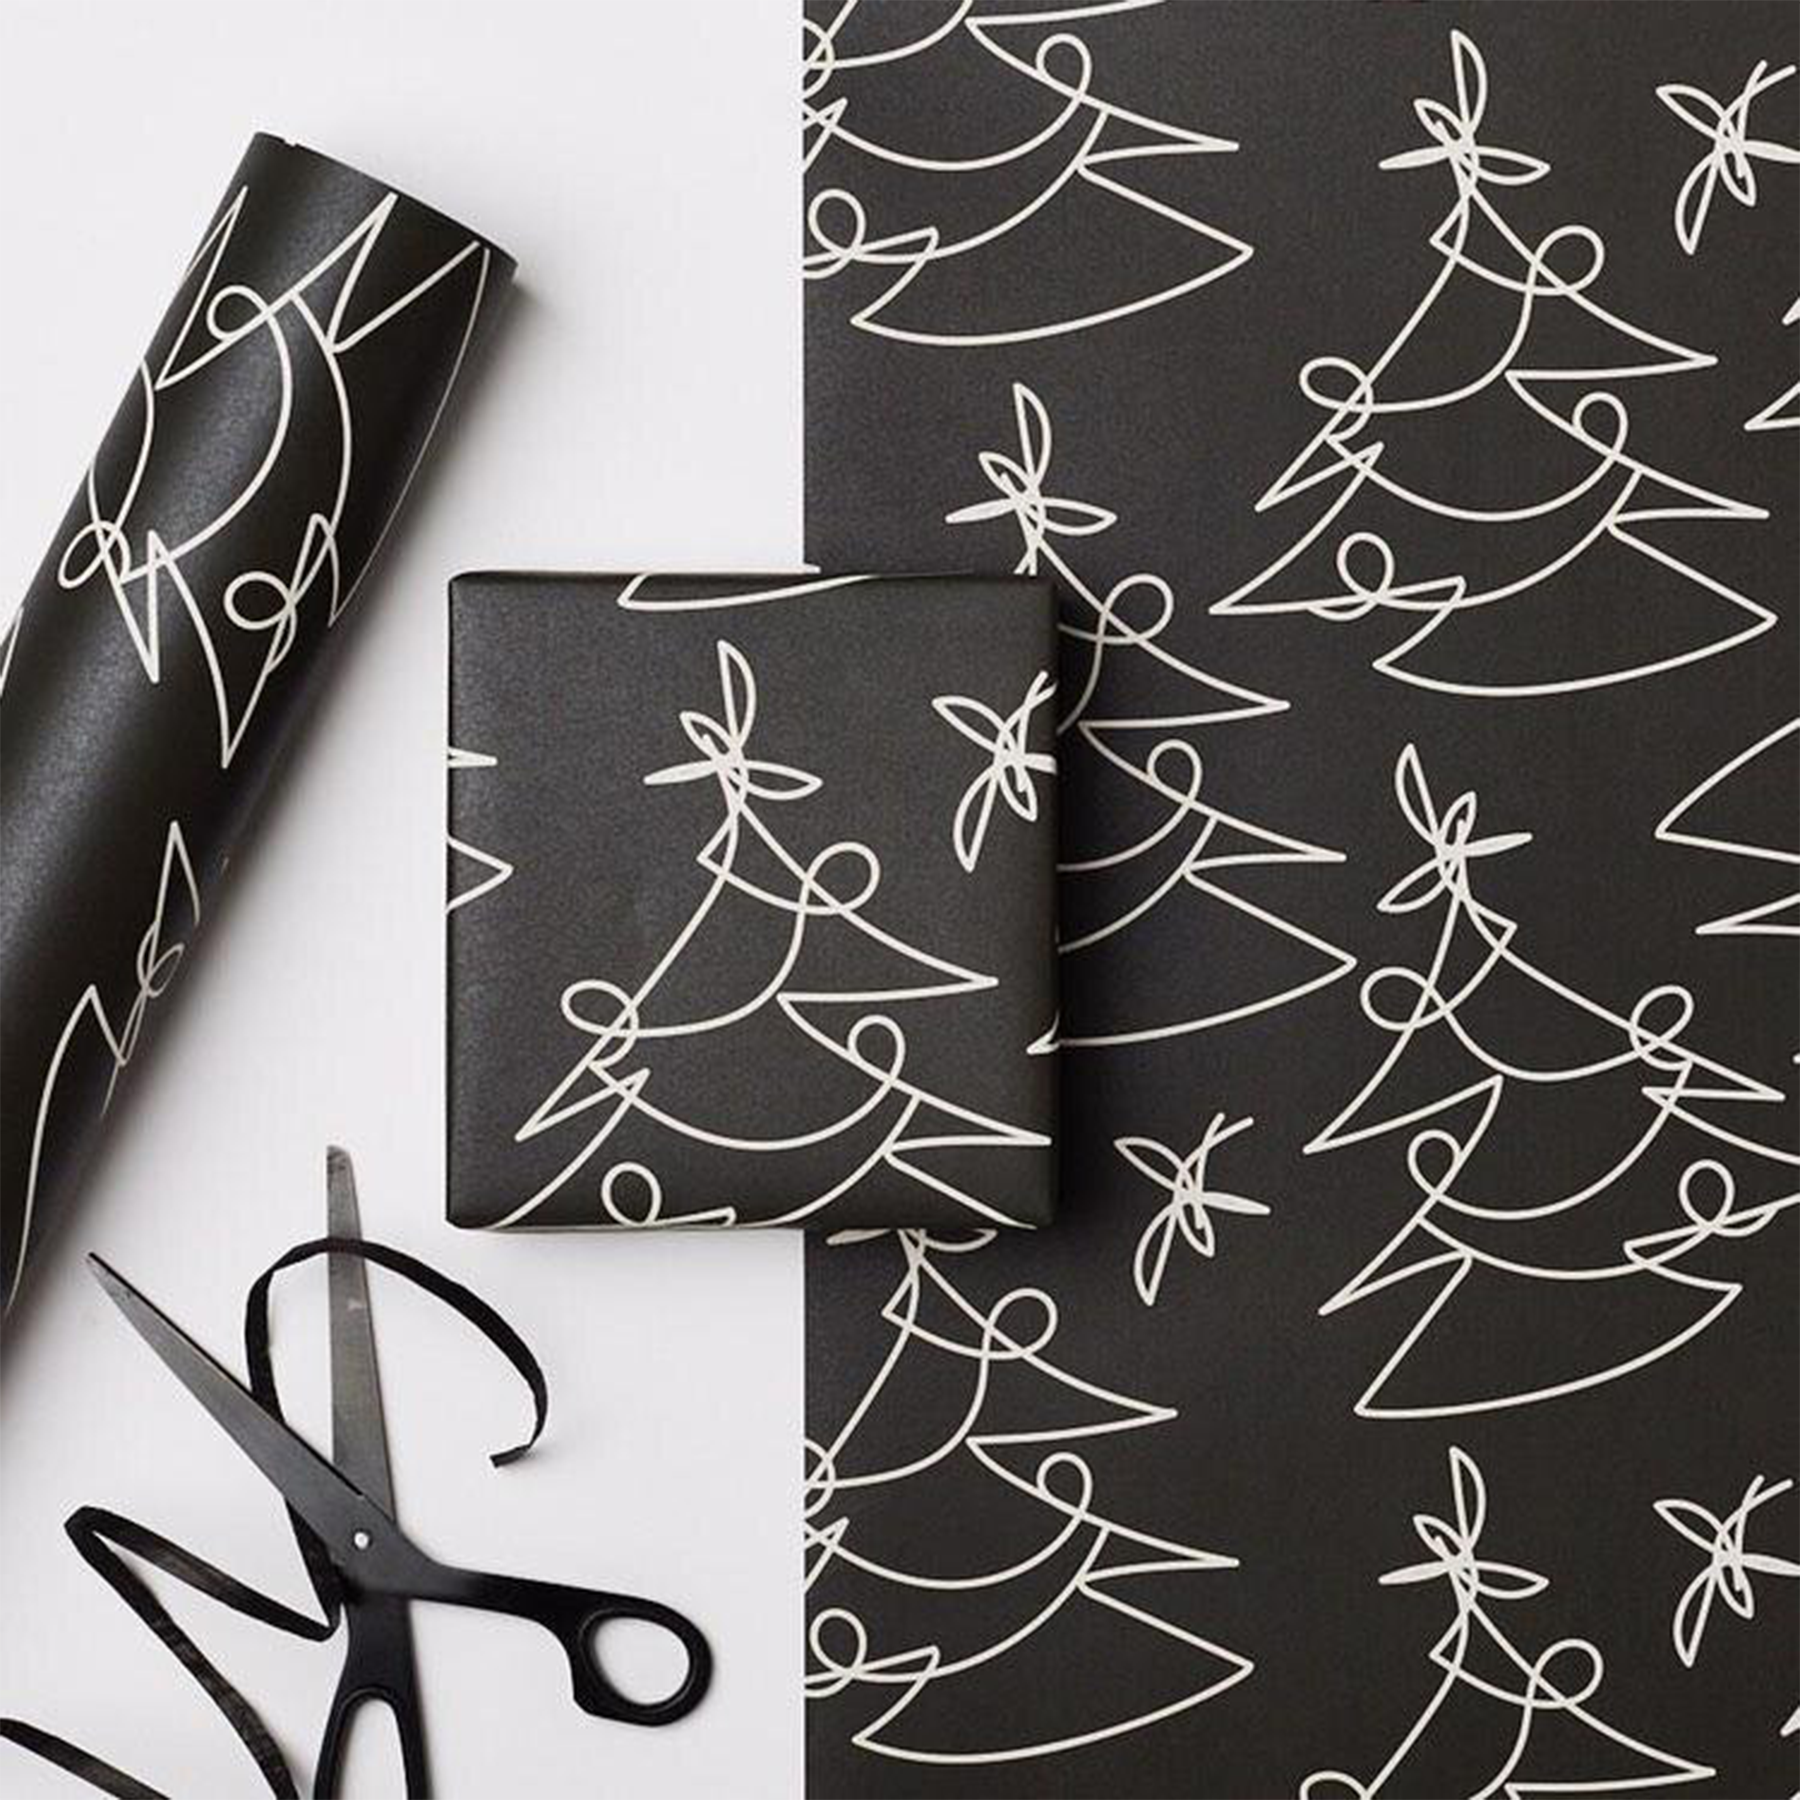 Recyclable Christmas Wrapping Paper - Black Tree Lines by Kinshipped - Pasoluna